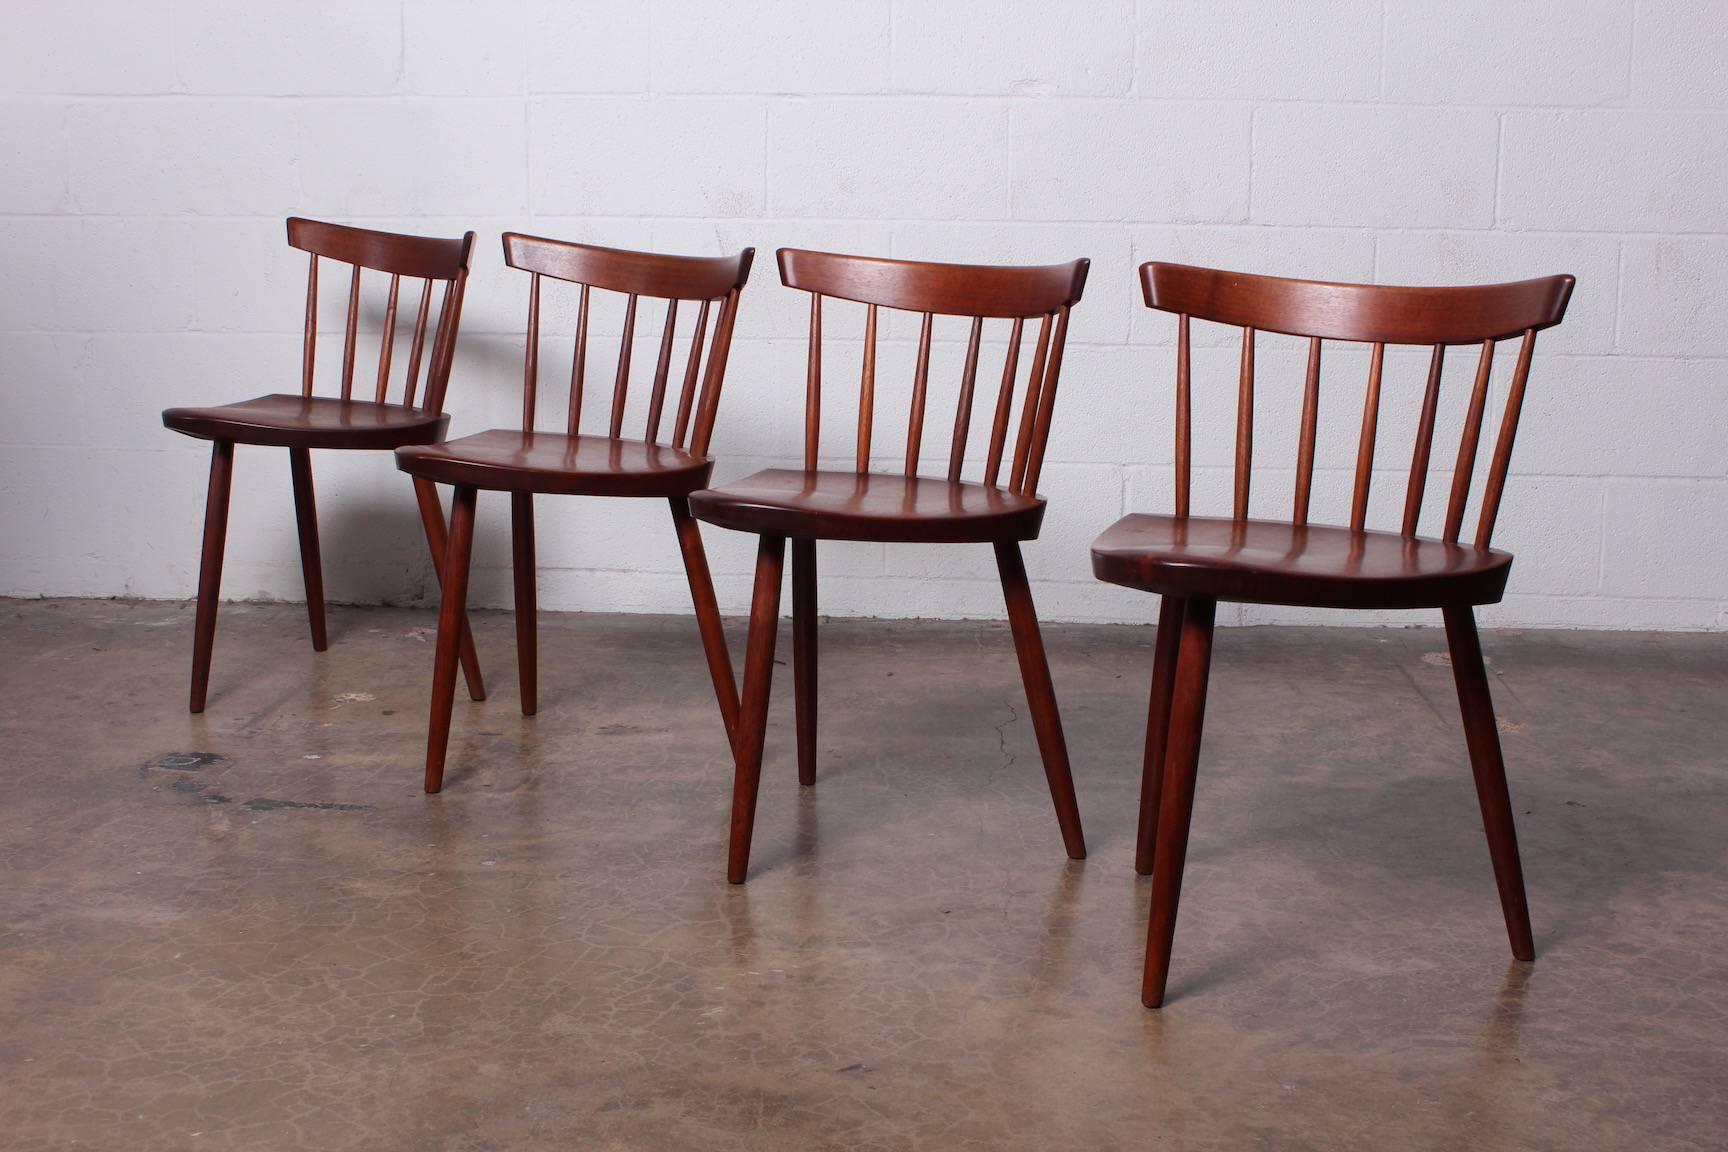 Mid-20th Century Set of Four Mira Chairs by George Nakashima, 1952